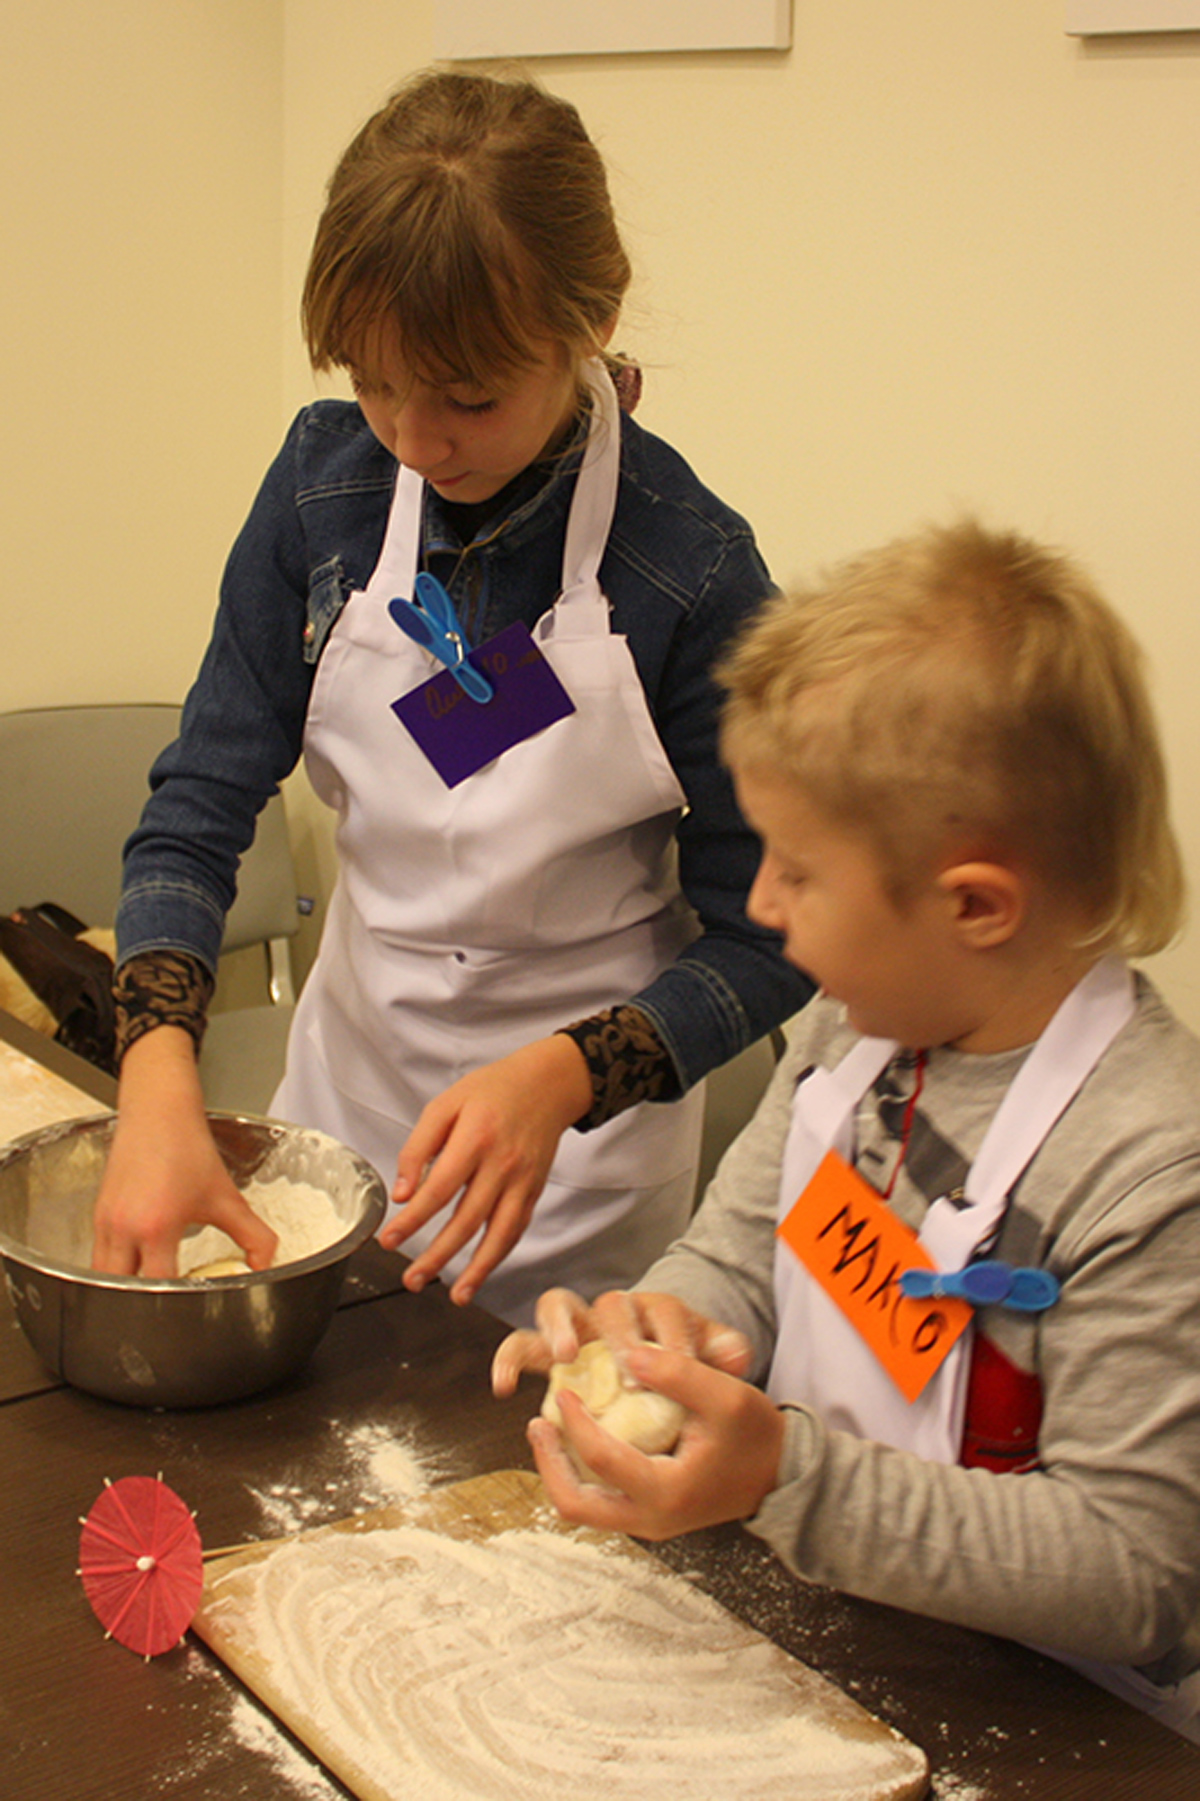 Kids make dough. How to cook dinner for mom. Cooking classes in Odessa.